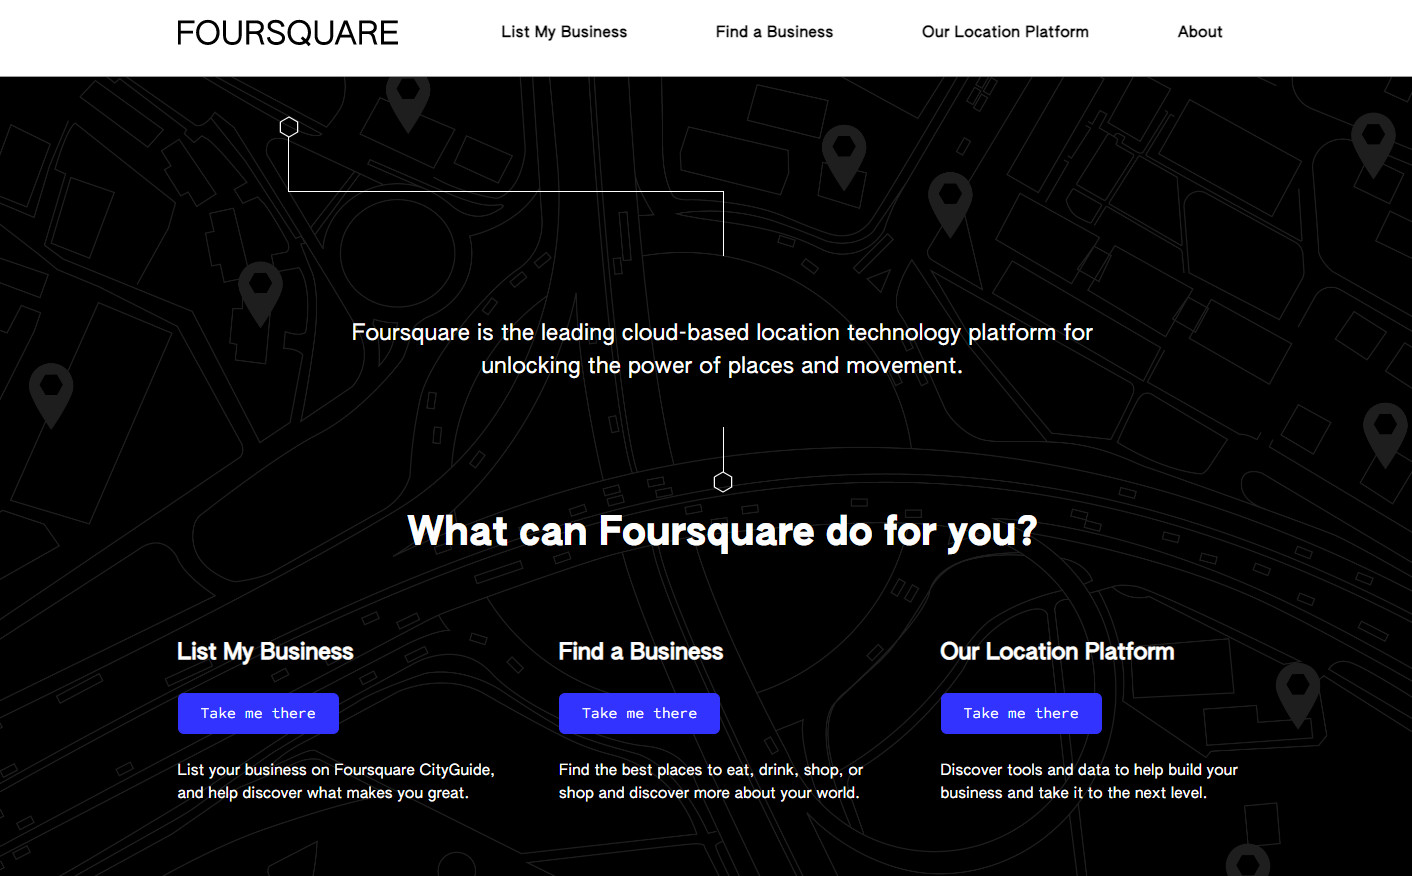 Foursquare is one of the more popular restaurant rating sites with great networking options